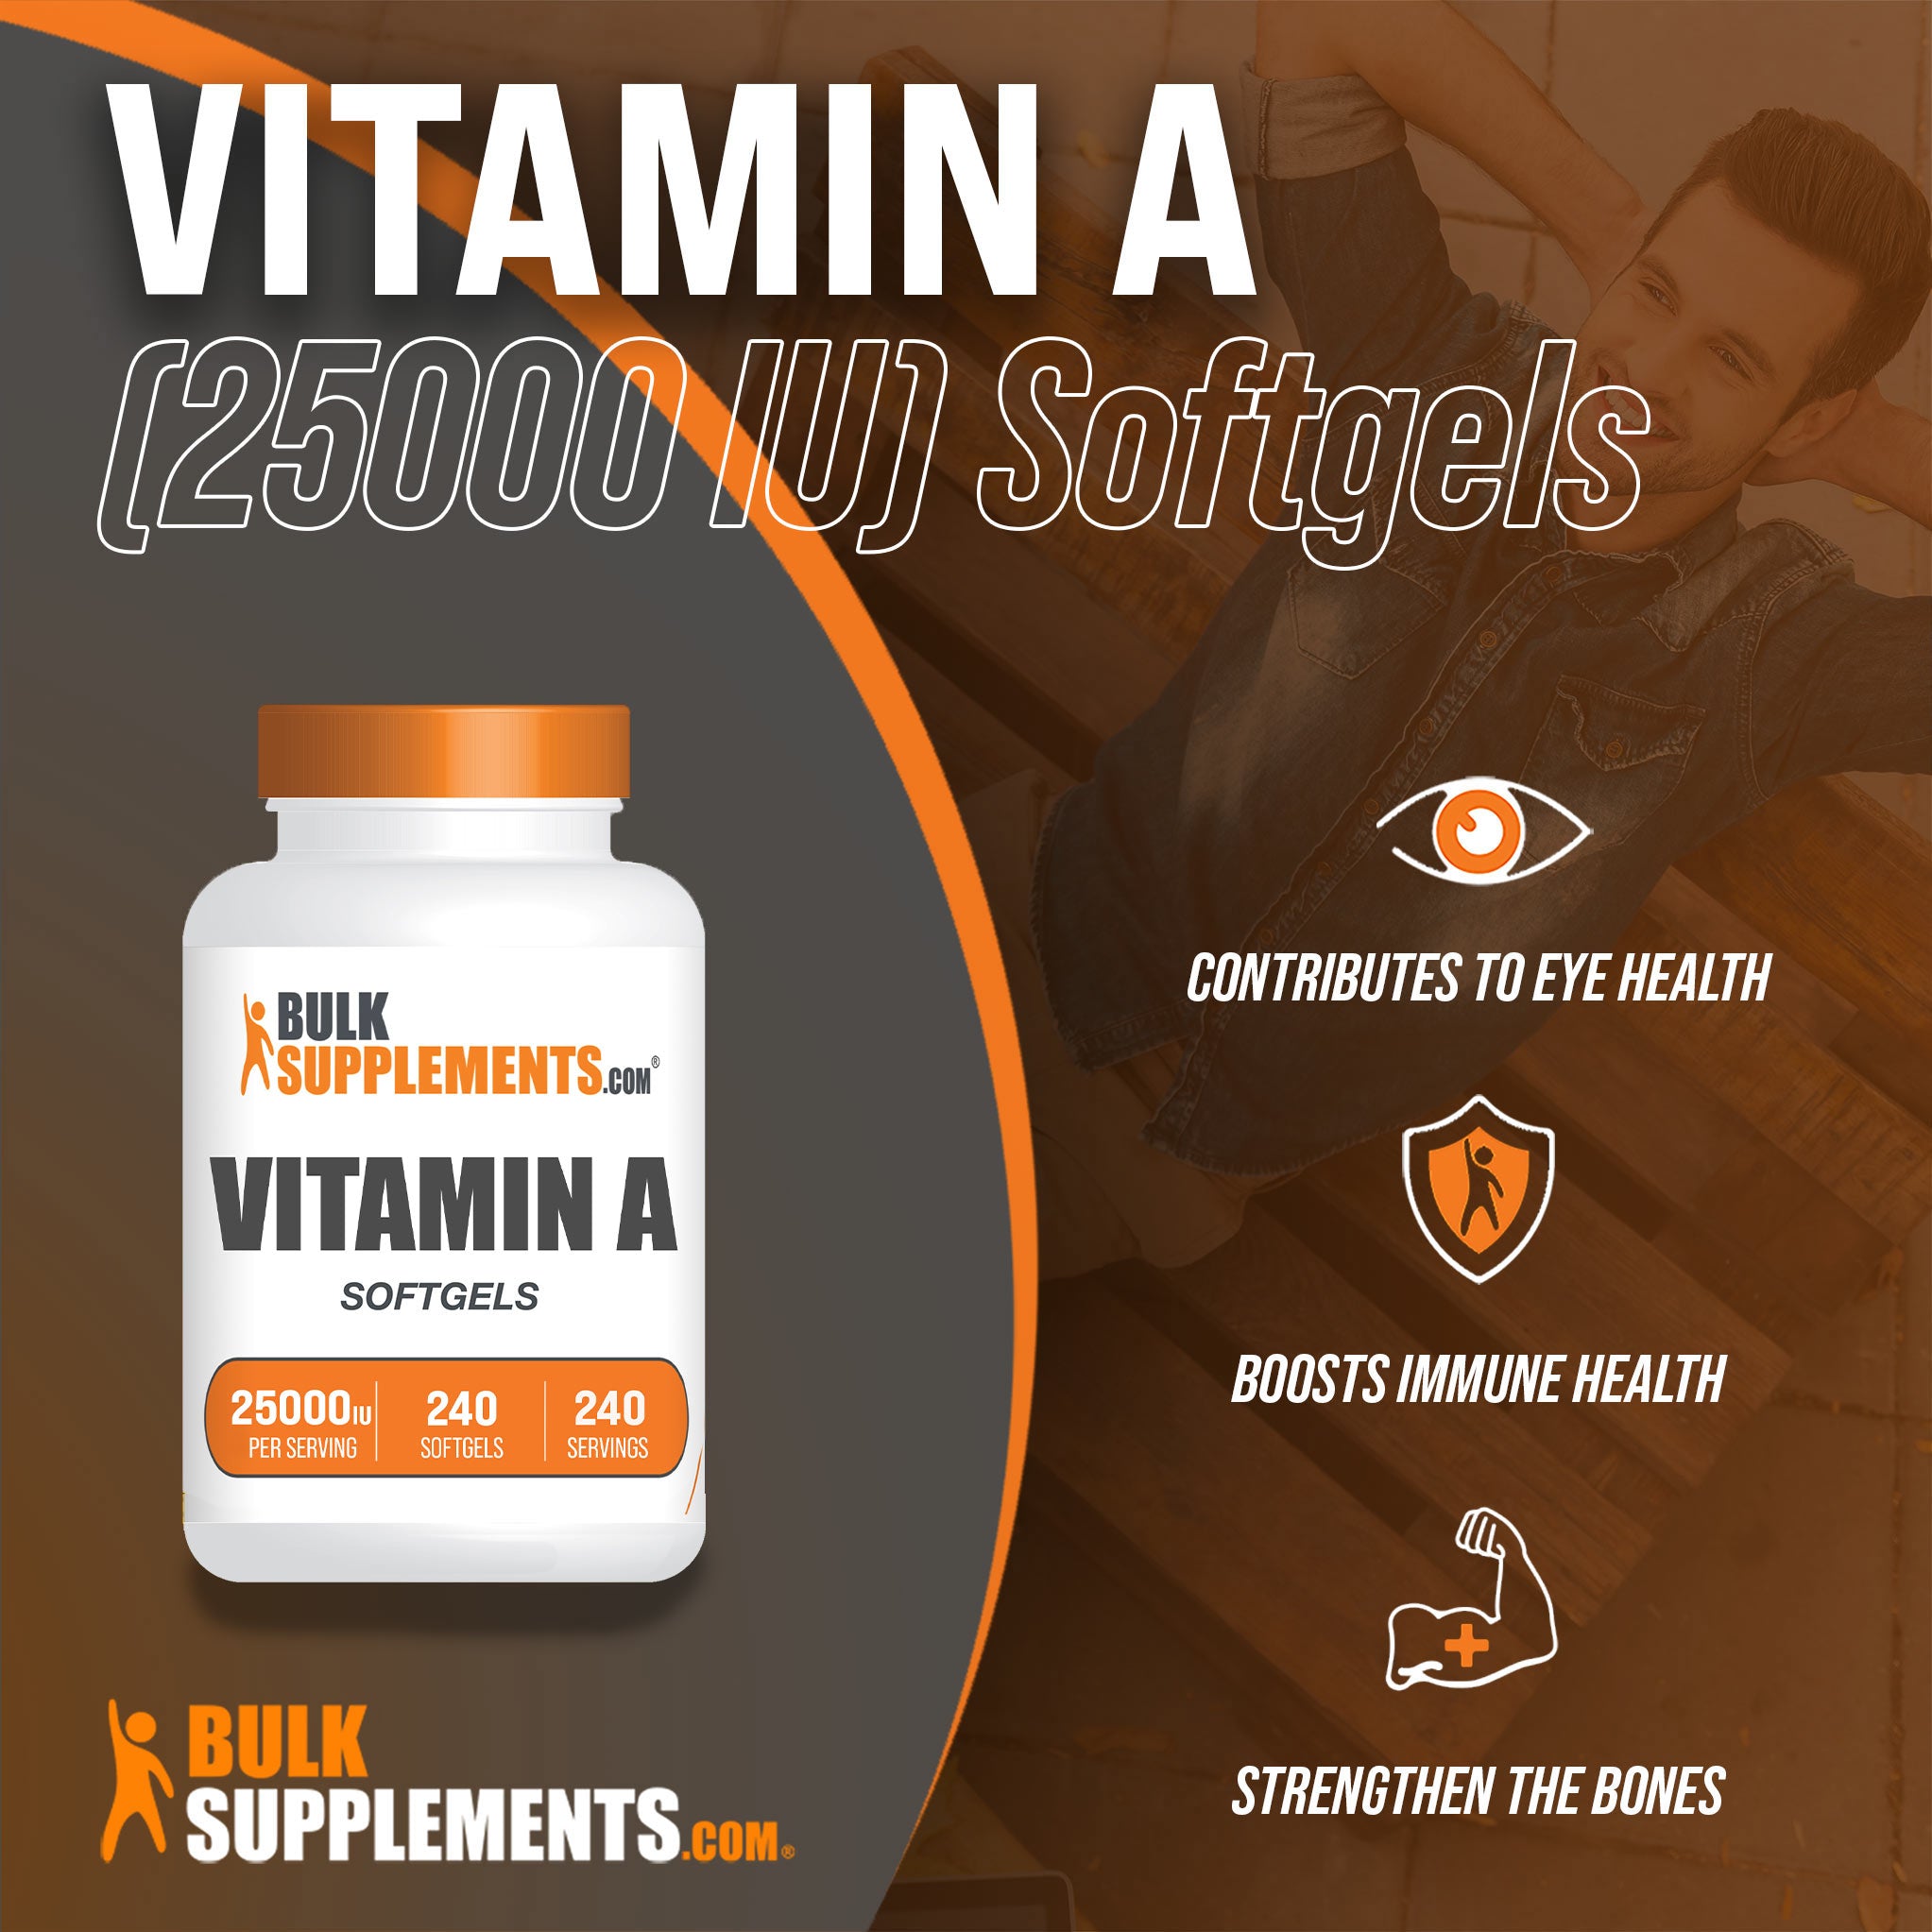 Benefits of Vitamin A Softgels; contributes to eye health, boosts immune health, strengthen the bones